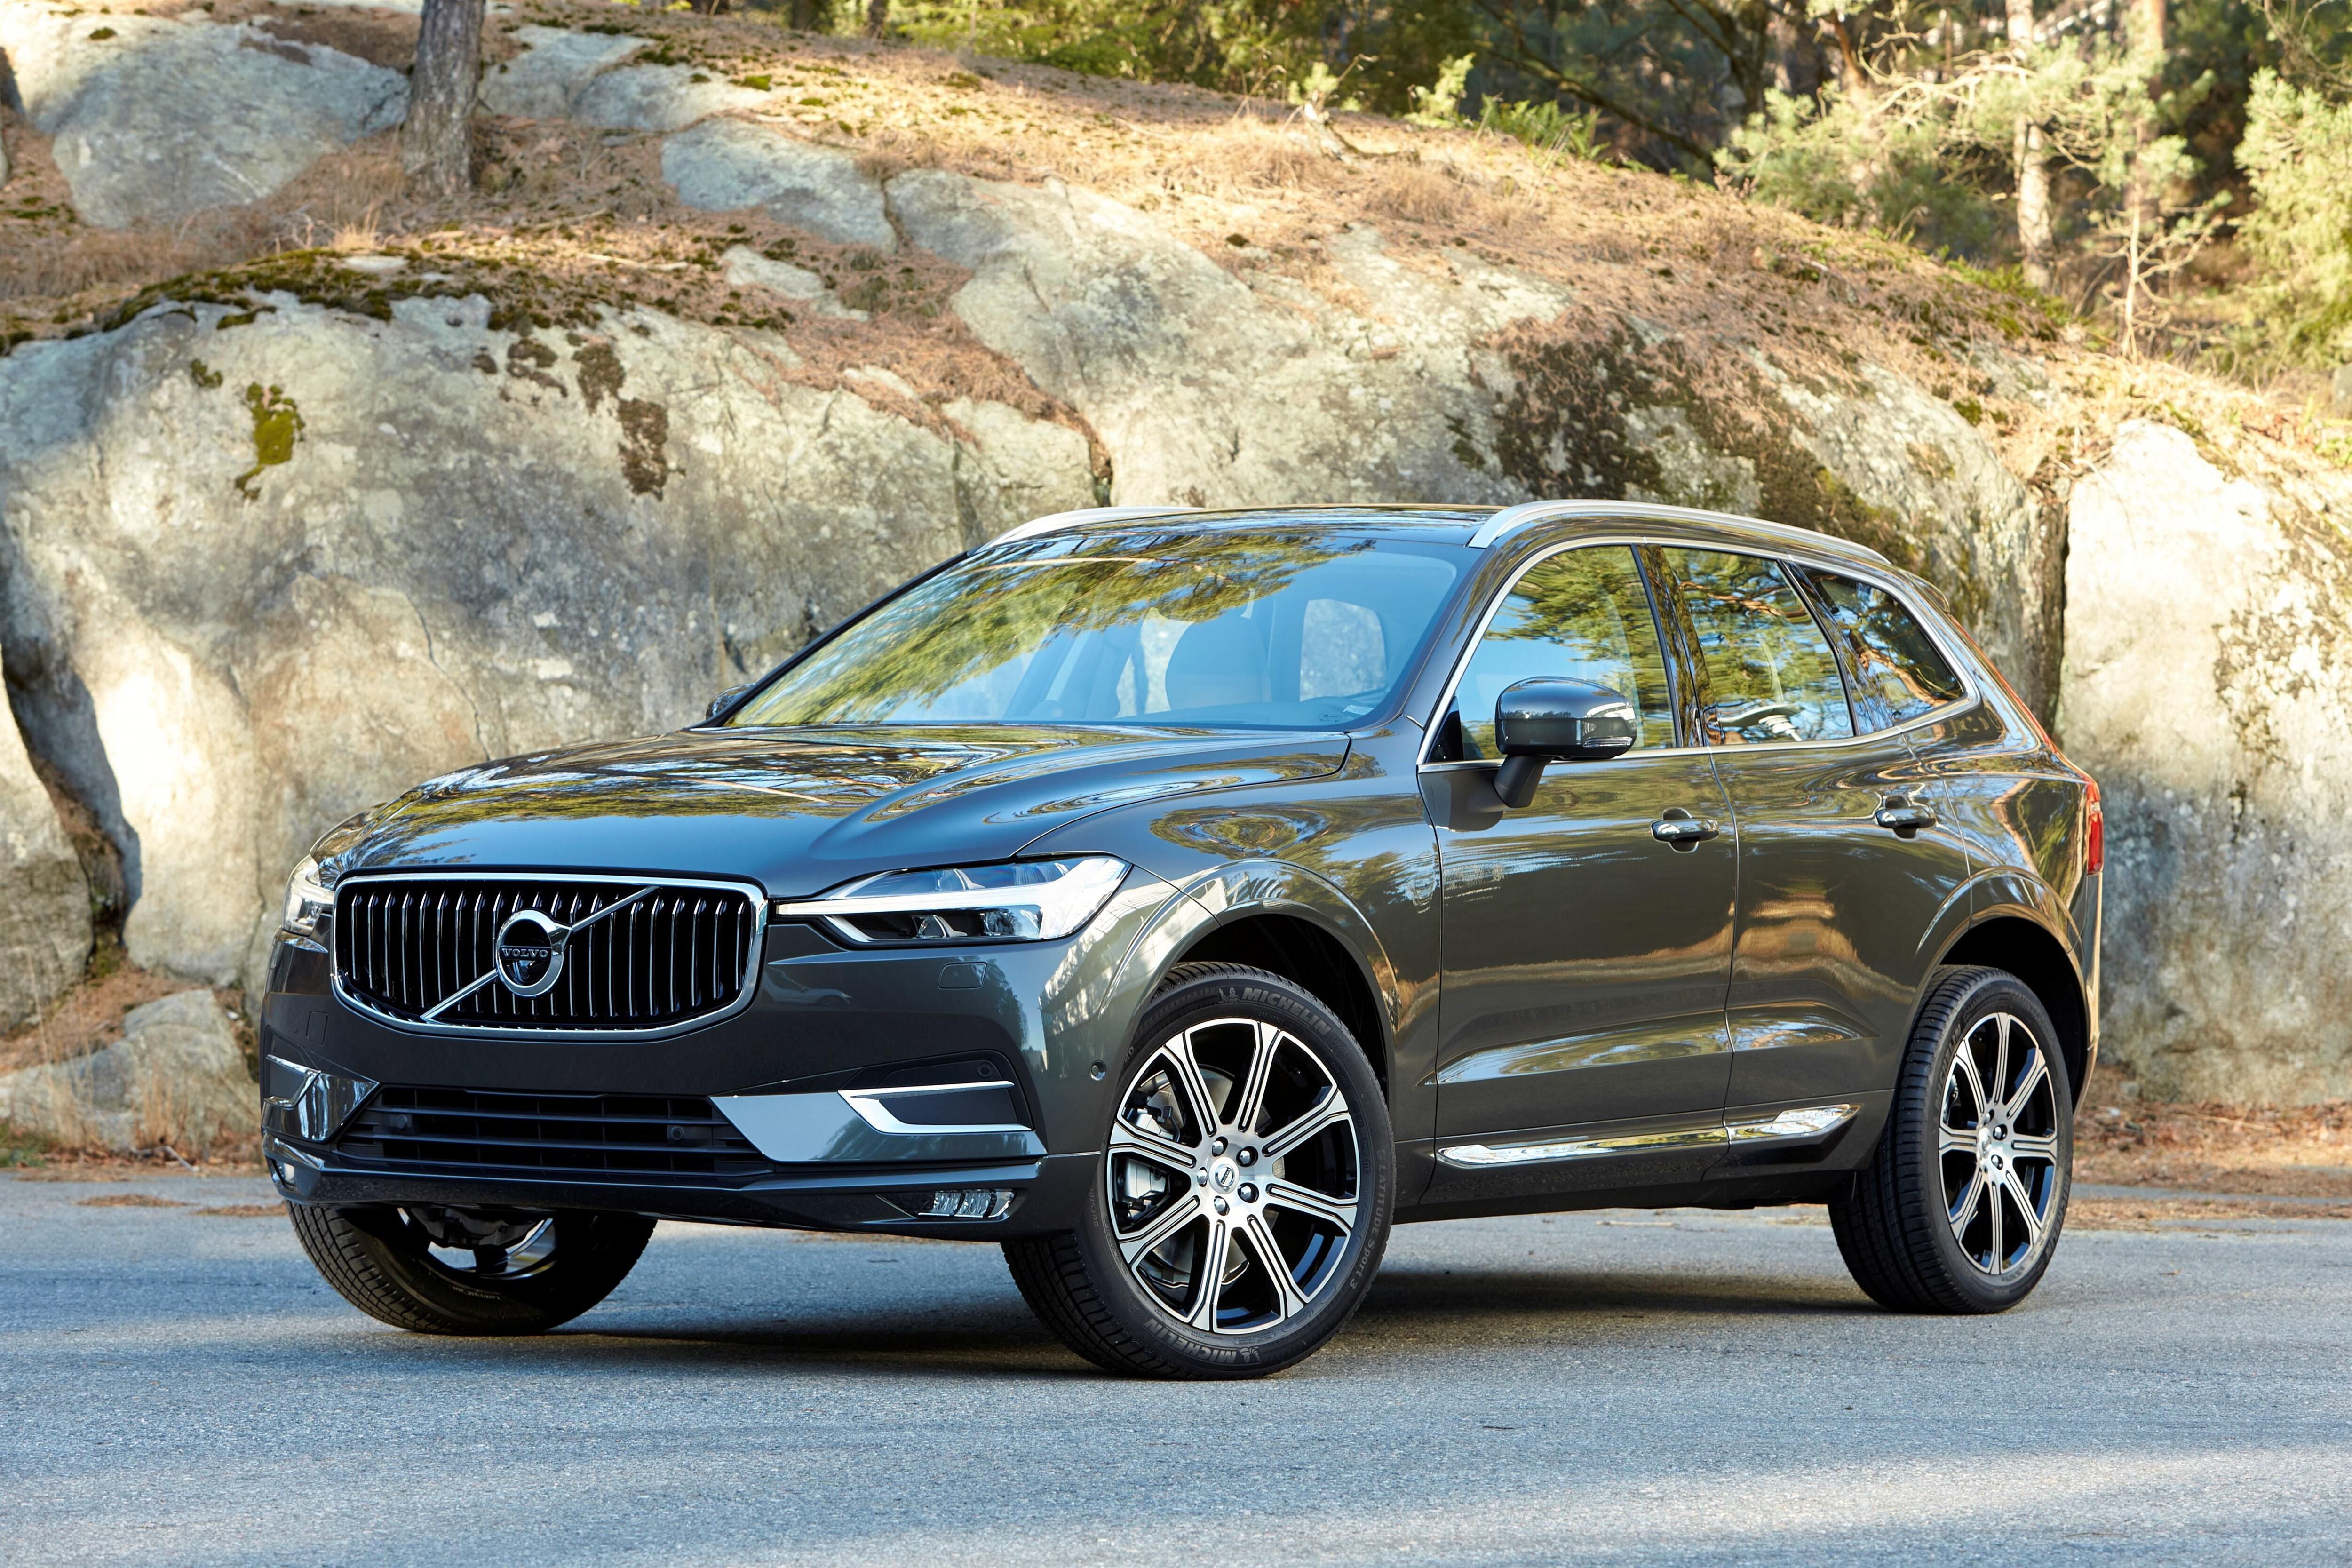 Volvo XC60 review: 'The safest car on the planet', Motoring